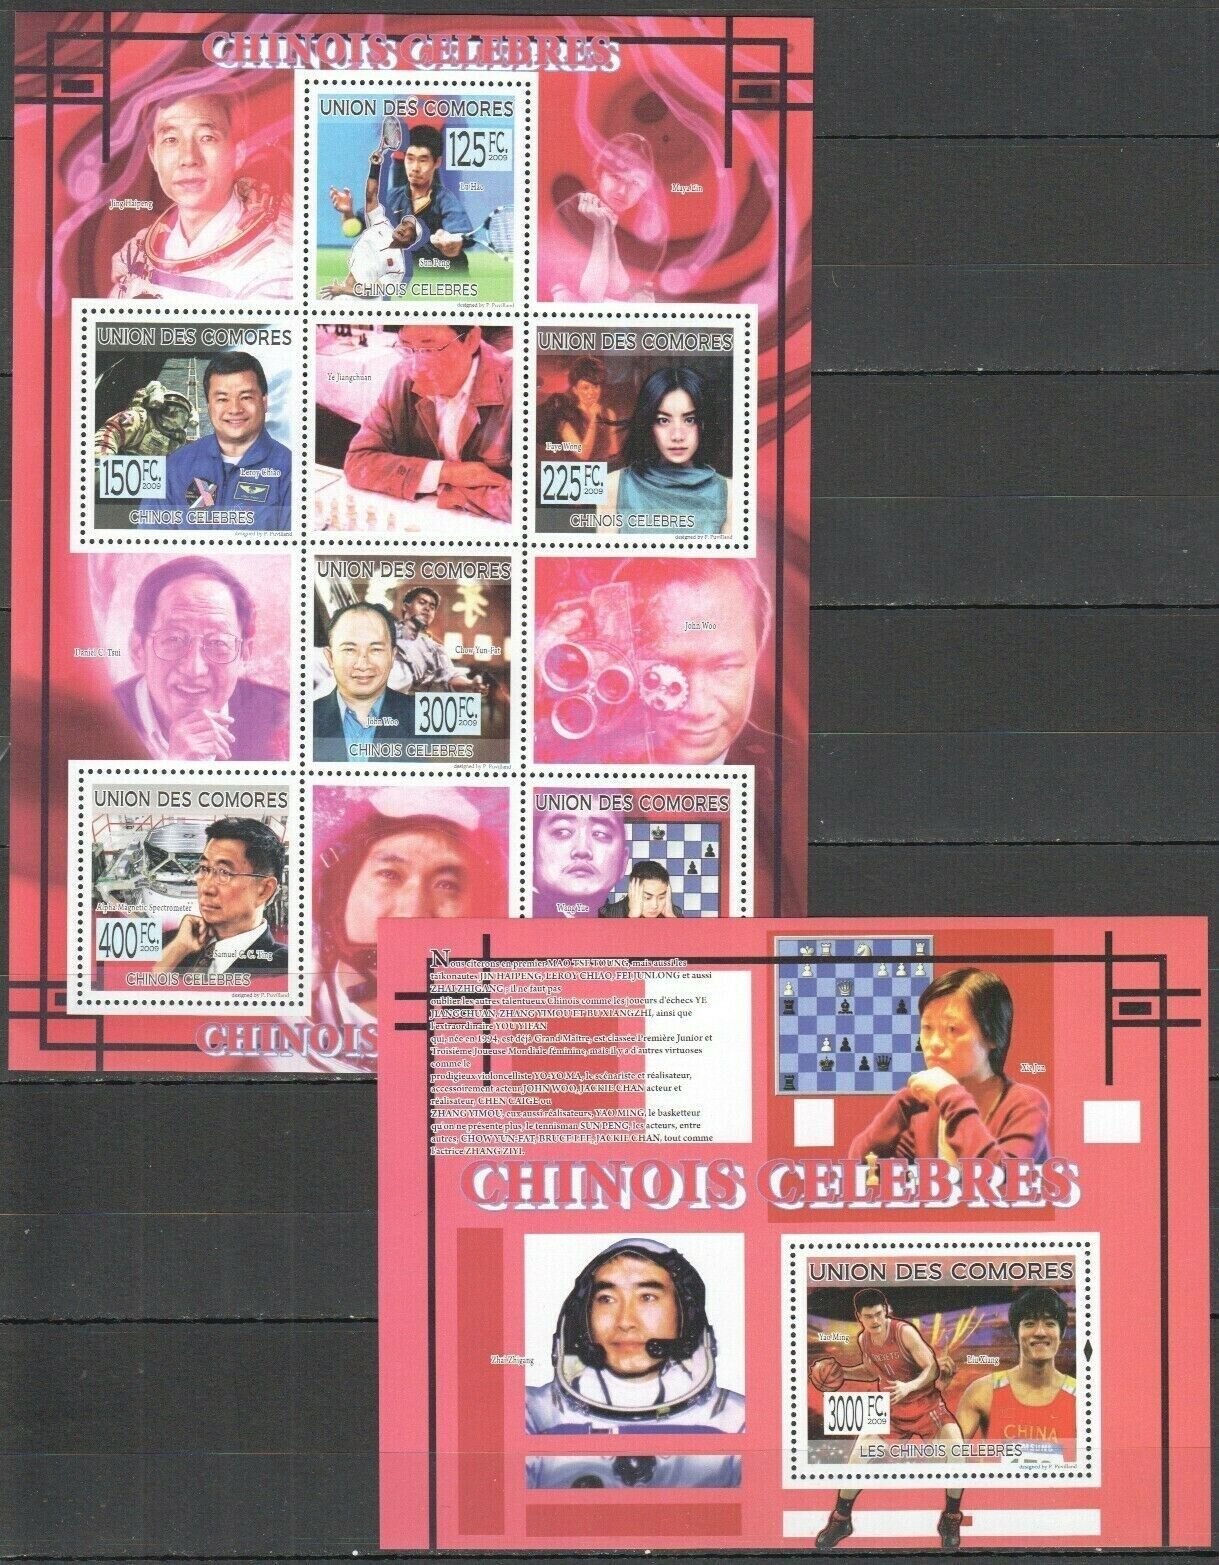 Comores 2009 Chinese Celebrities Basketball Tennis Chess Space Cinema